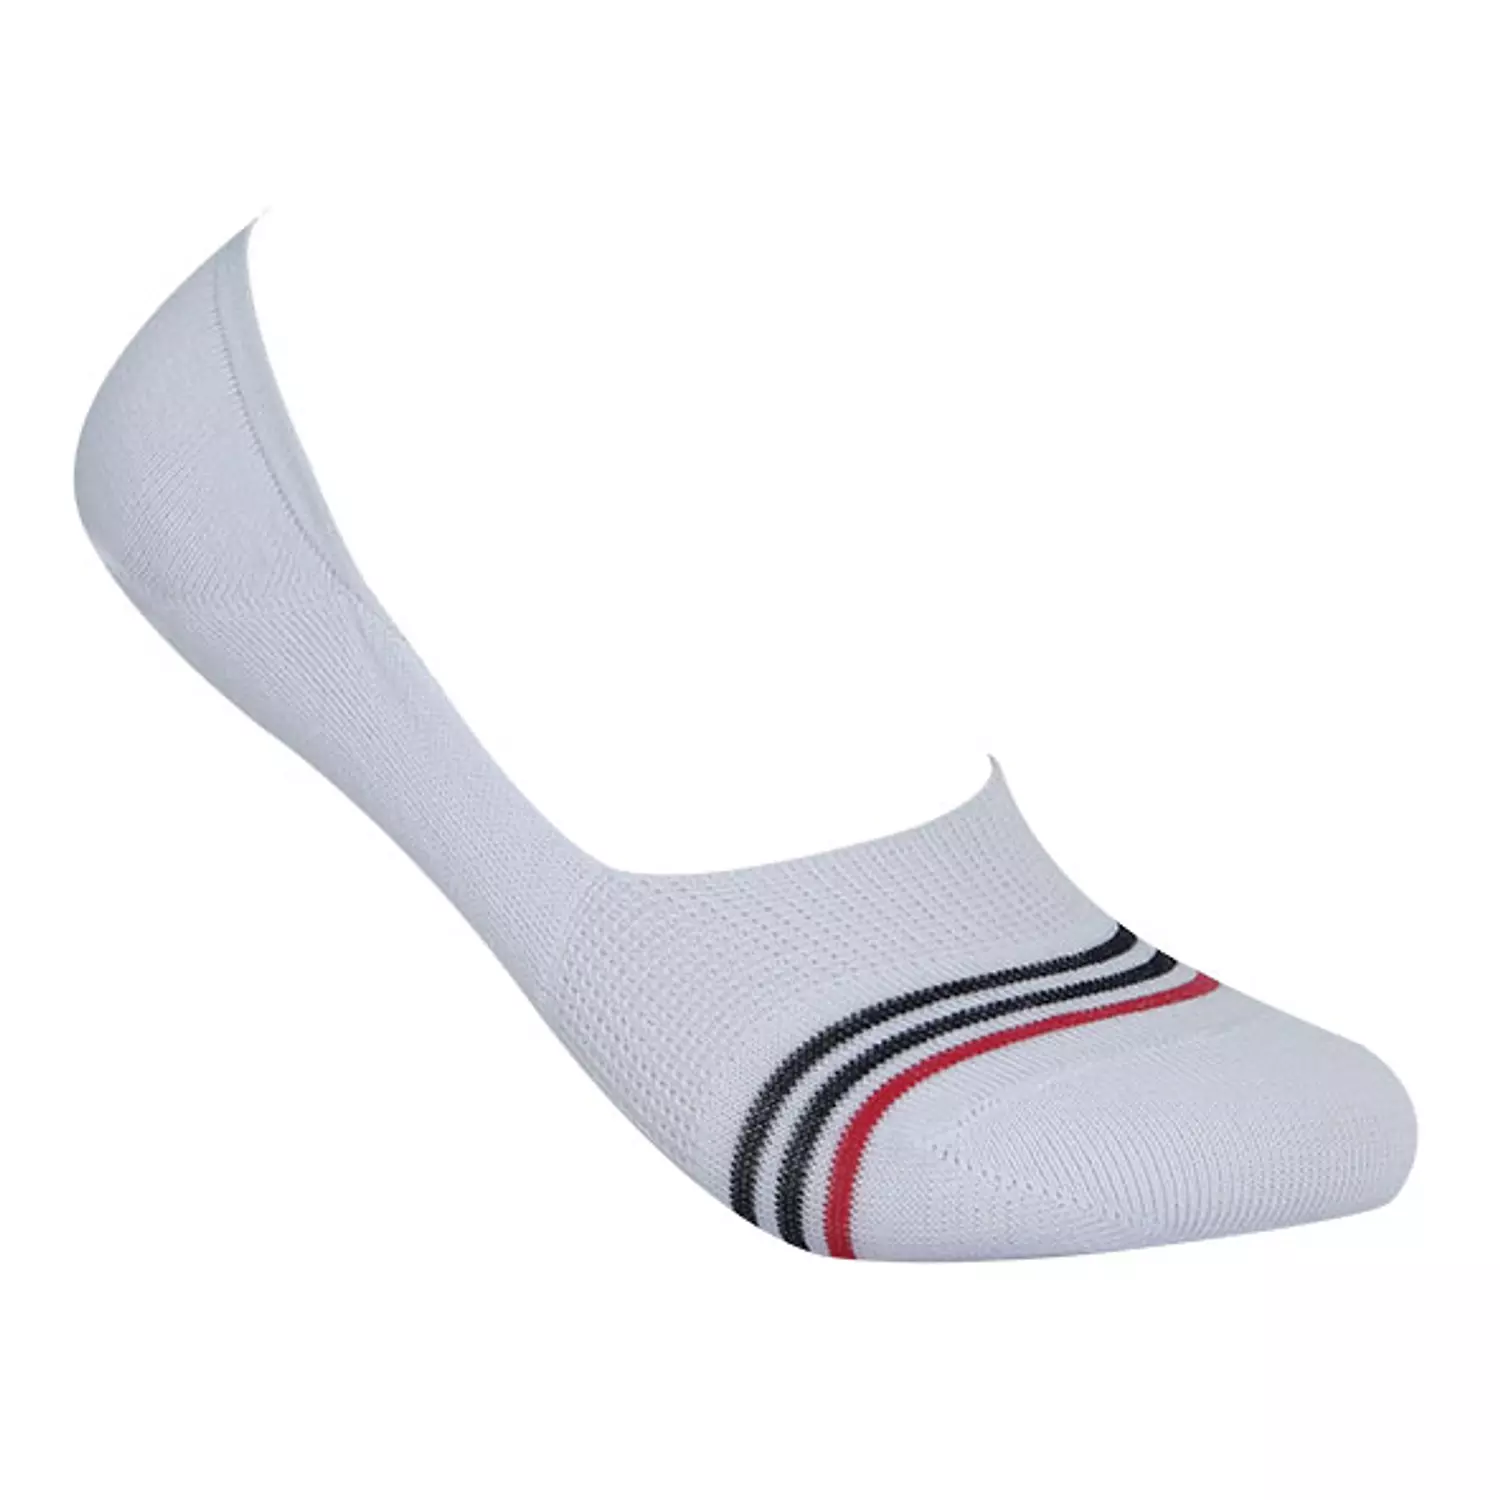 Vouche invisible Sock for women's 2